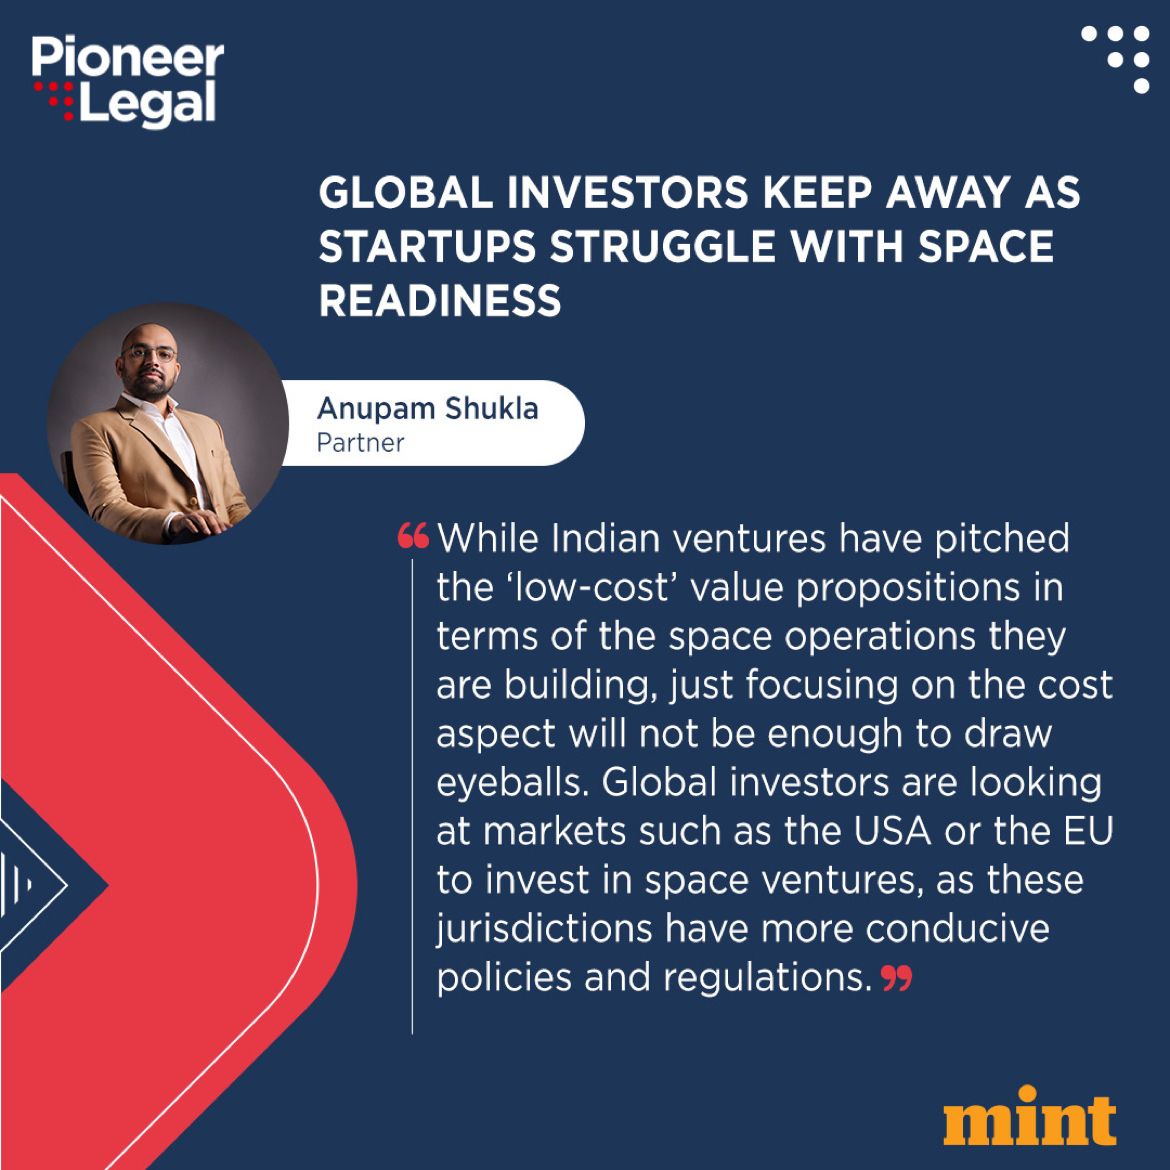 Pioneer Legal - Global Investors Keep Away as Startups Struggle With Space Readiness